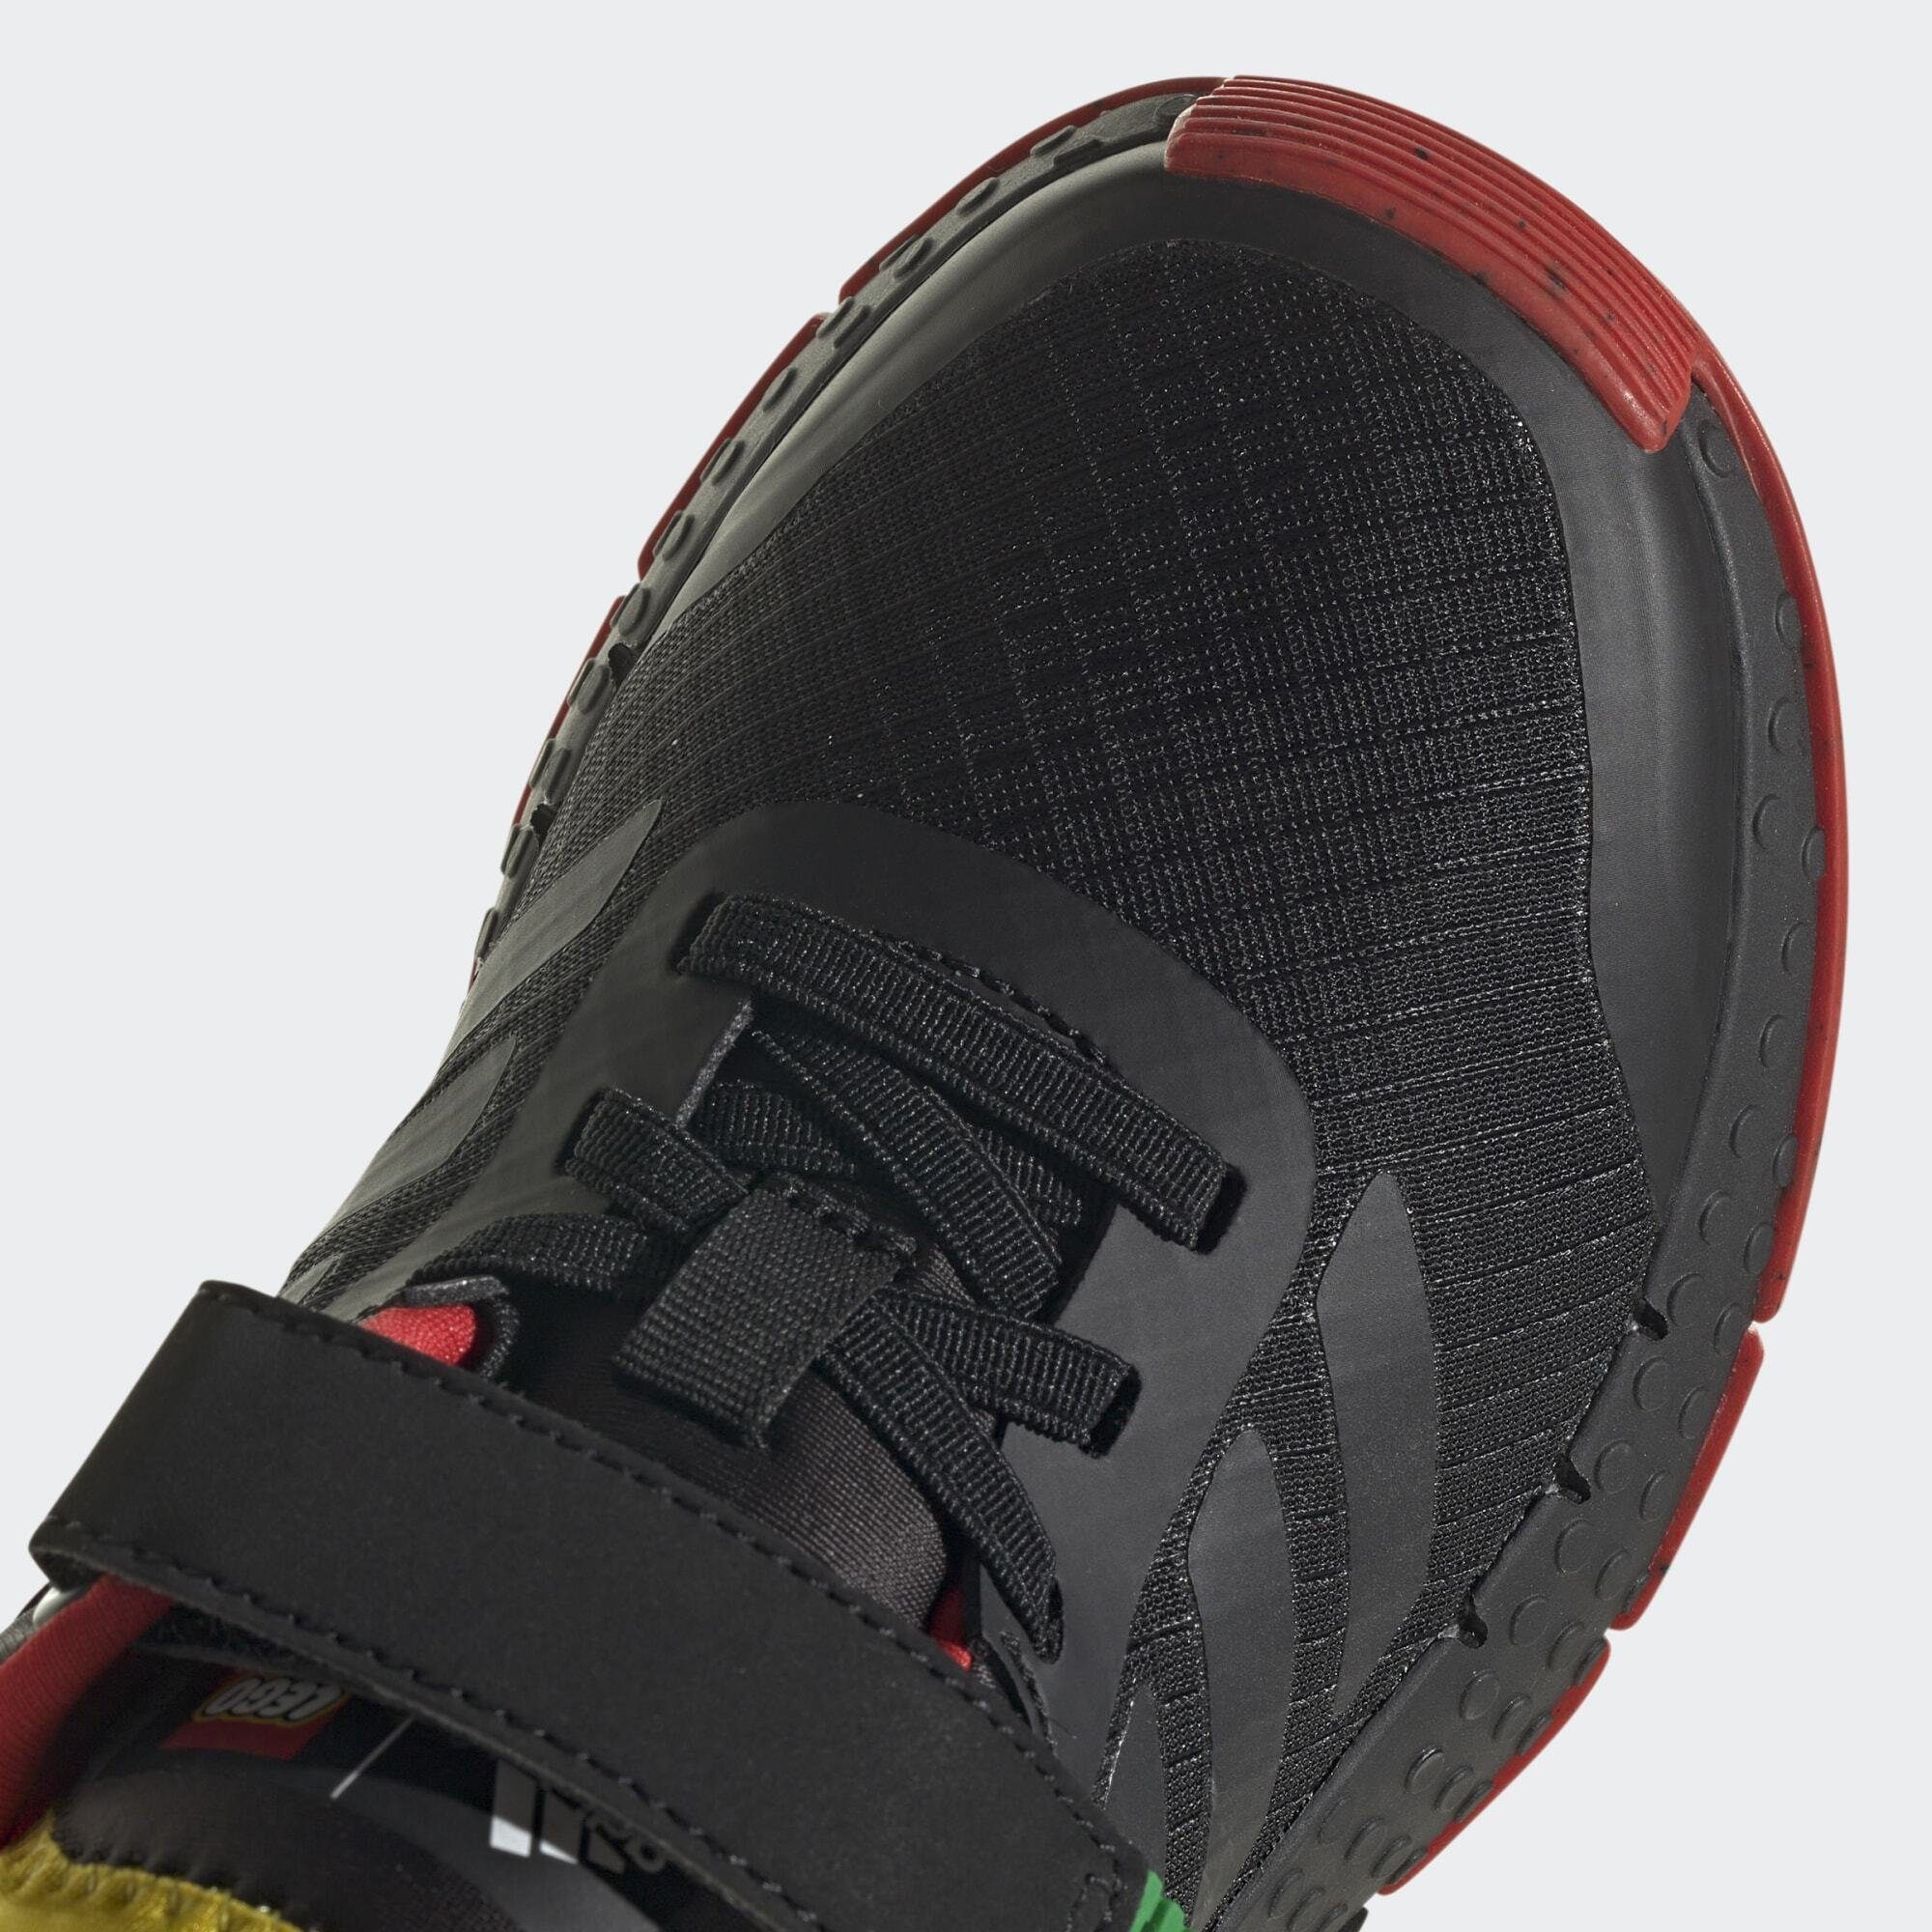 Black STRAP / LEGO SCHUH Sportswear Core Black AND ADIDAS X LACE TOP DNA adidas Core ELASTIC Red Sneaker /